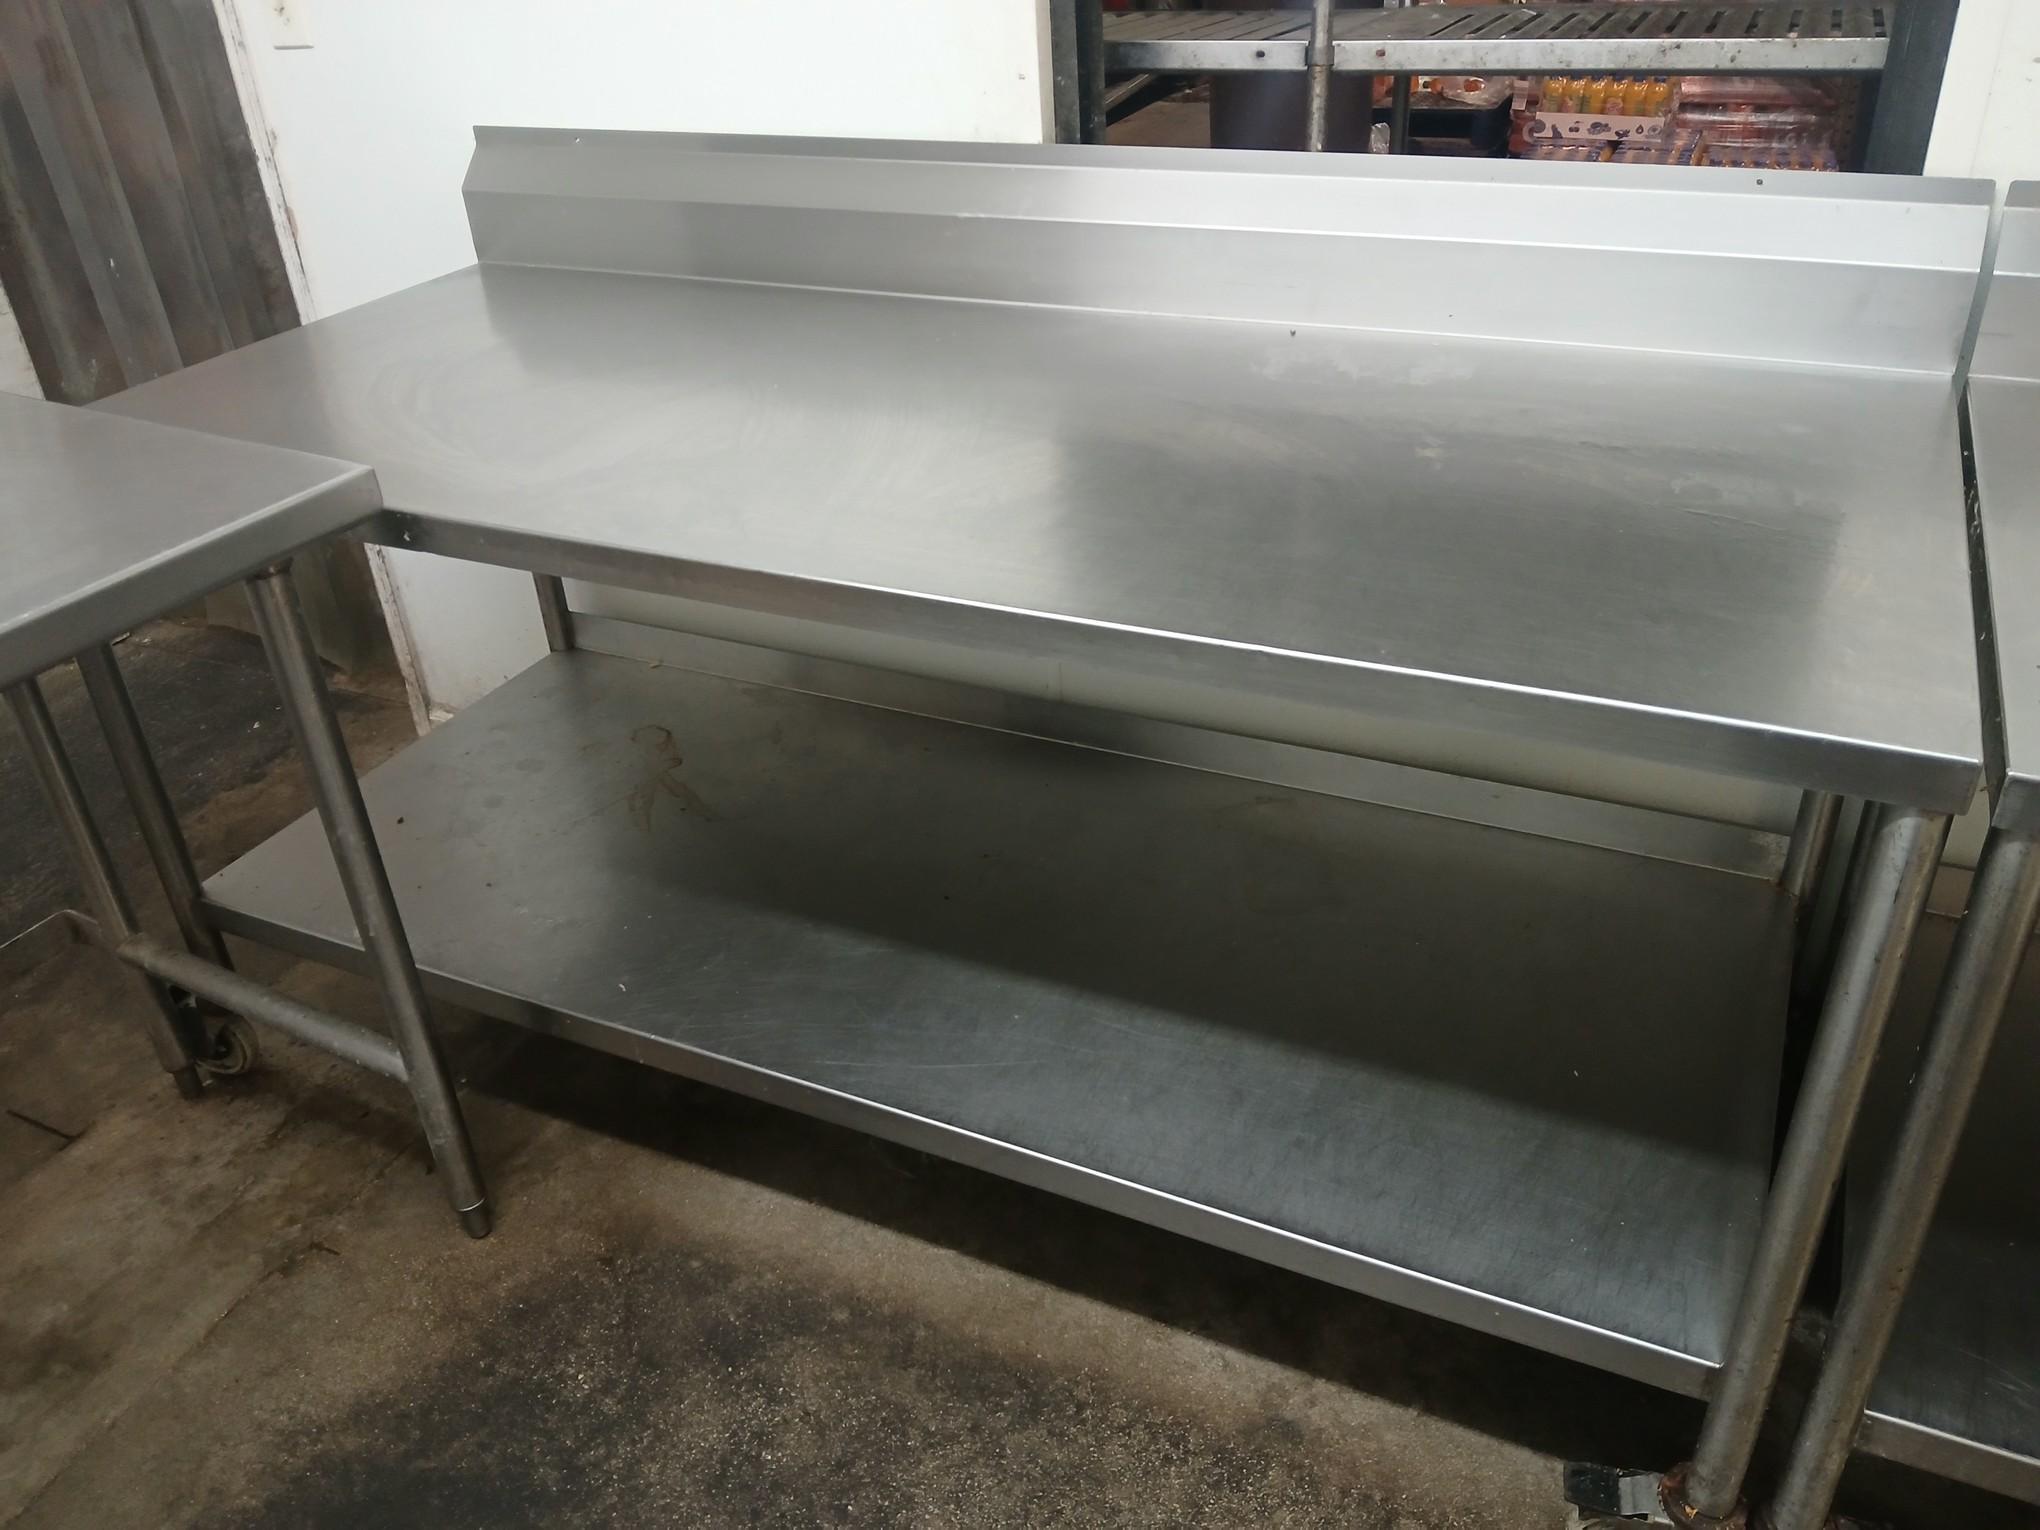 60" Solid Stainless Steel Table W/ Stainless Under Shelf & Casters - Comes Complete with Backsplash